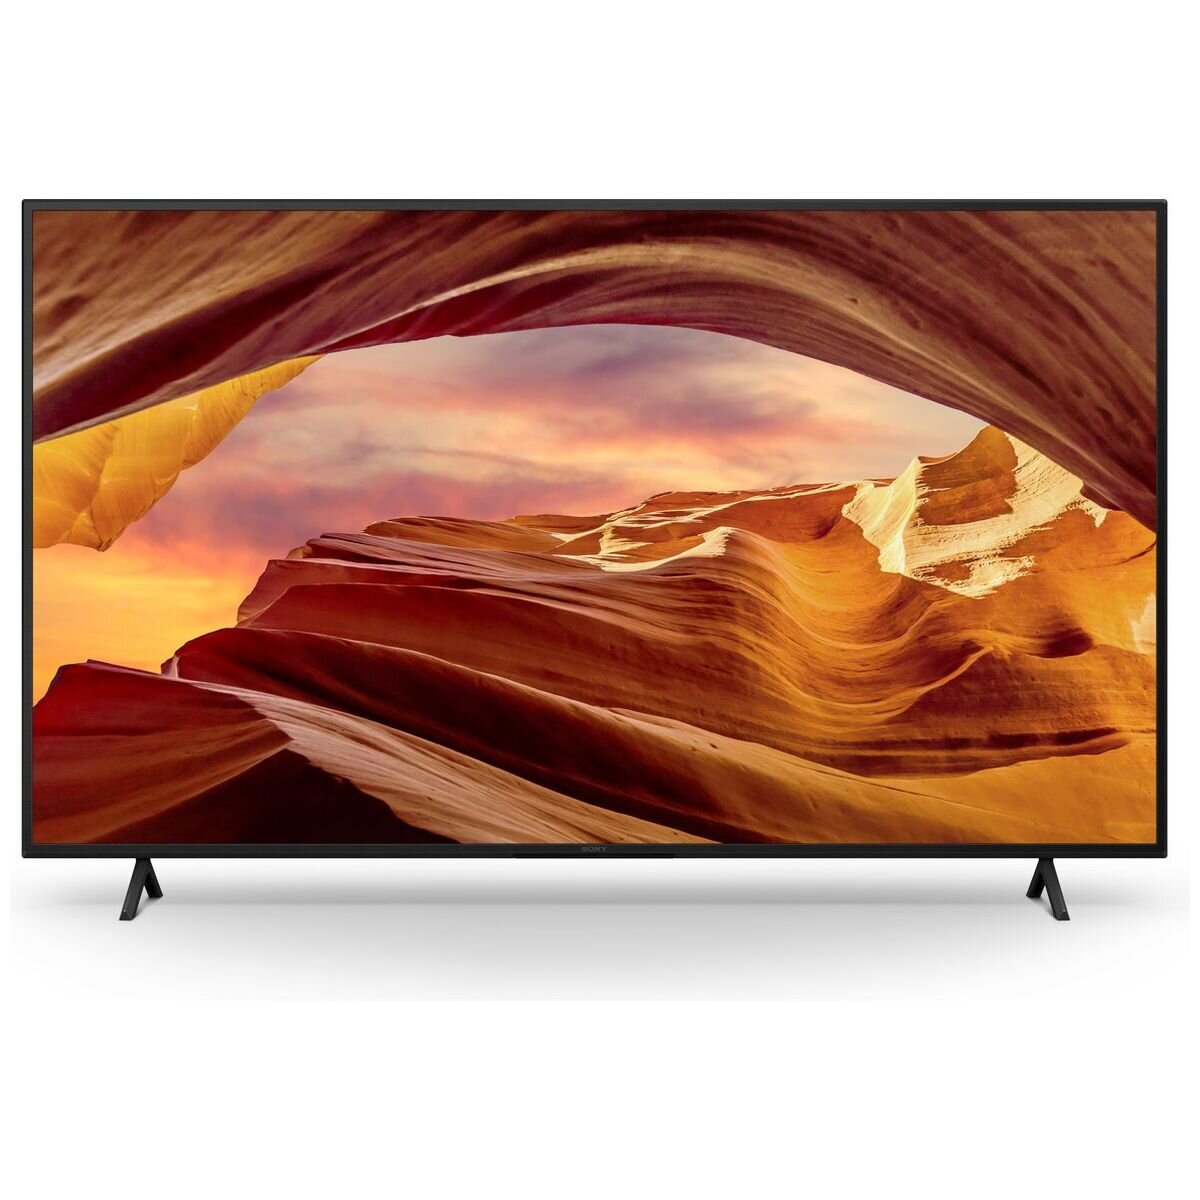 50 - 59 inch LED/Sony: Sony, Bravia, X77L, TV, 50", Entry, 4K, (3840, x, 2160), 450-cd/m2, Brightness, HDR10, HLG, Android, TV, Google, TV, 3, Year, Ons, 